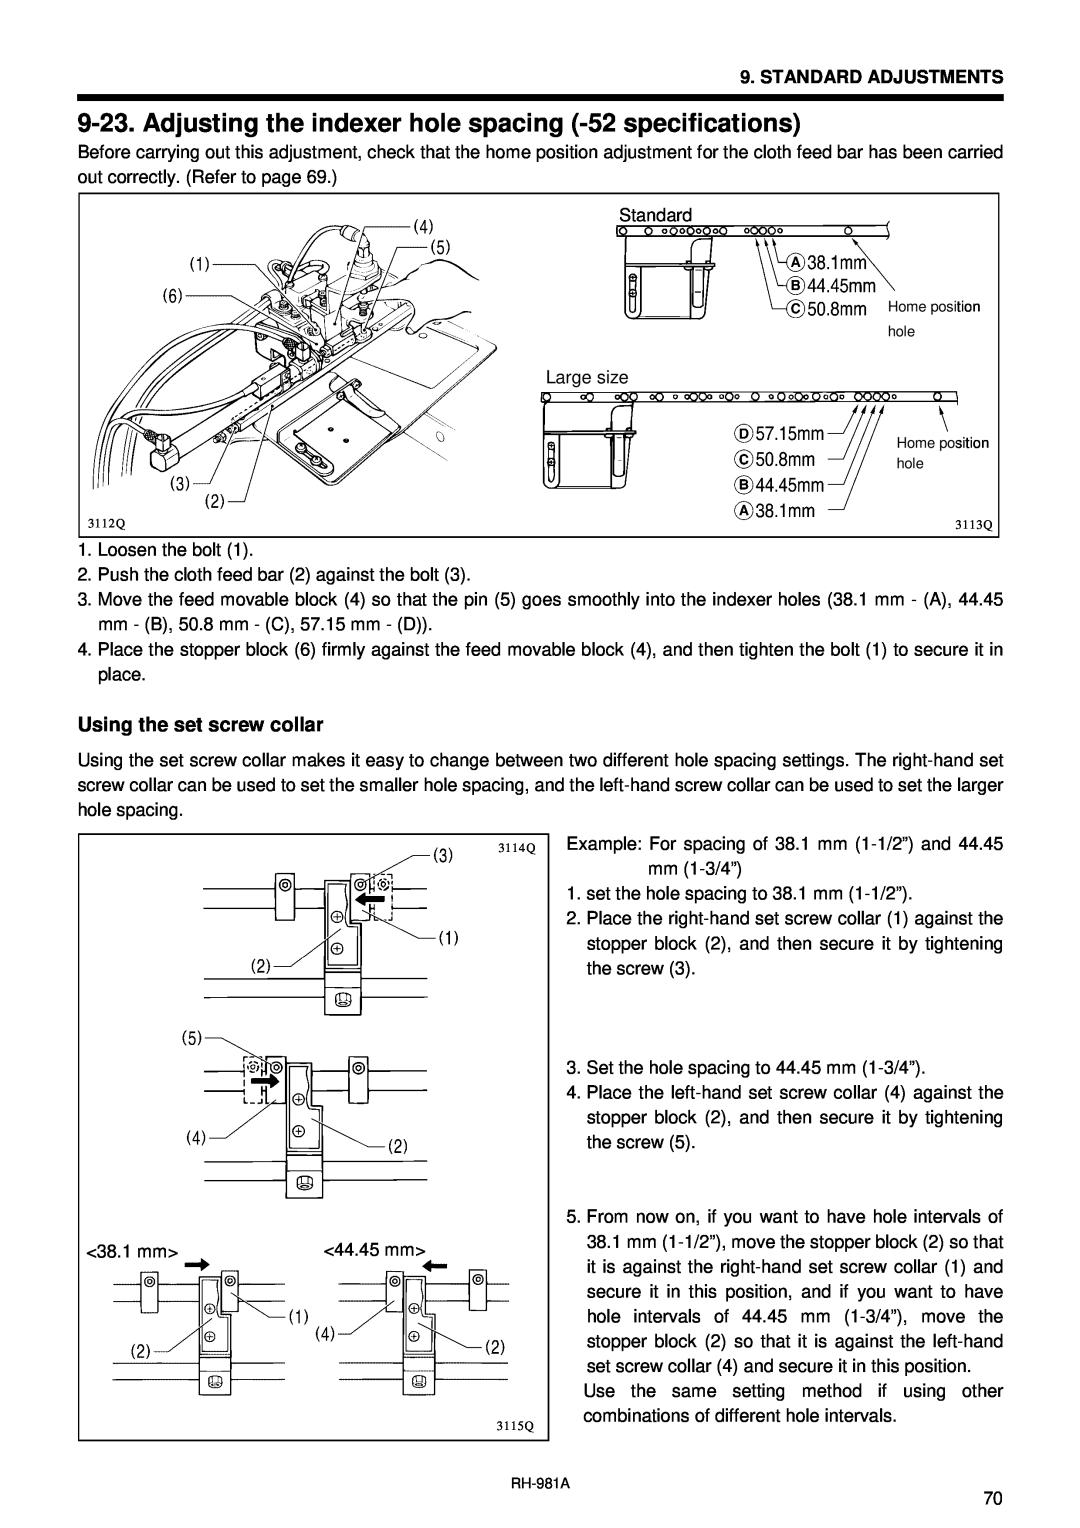 Brother rh-918a manual Adjusting the indexer hole spacing -52 specifications, Using the set screw collar 